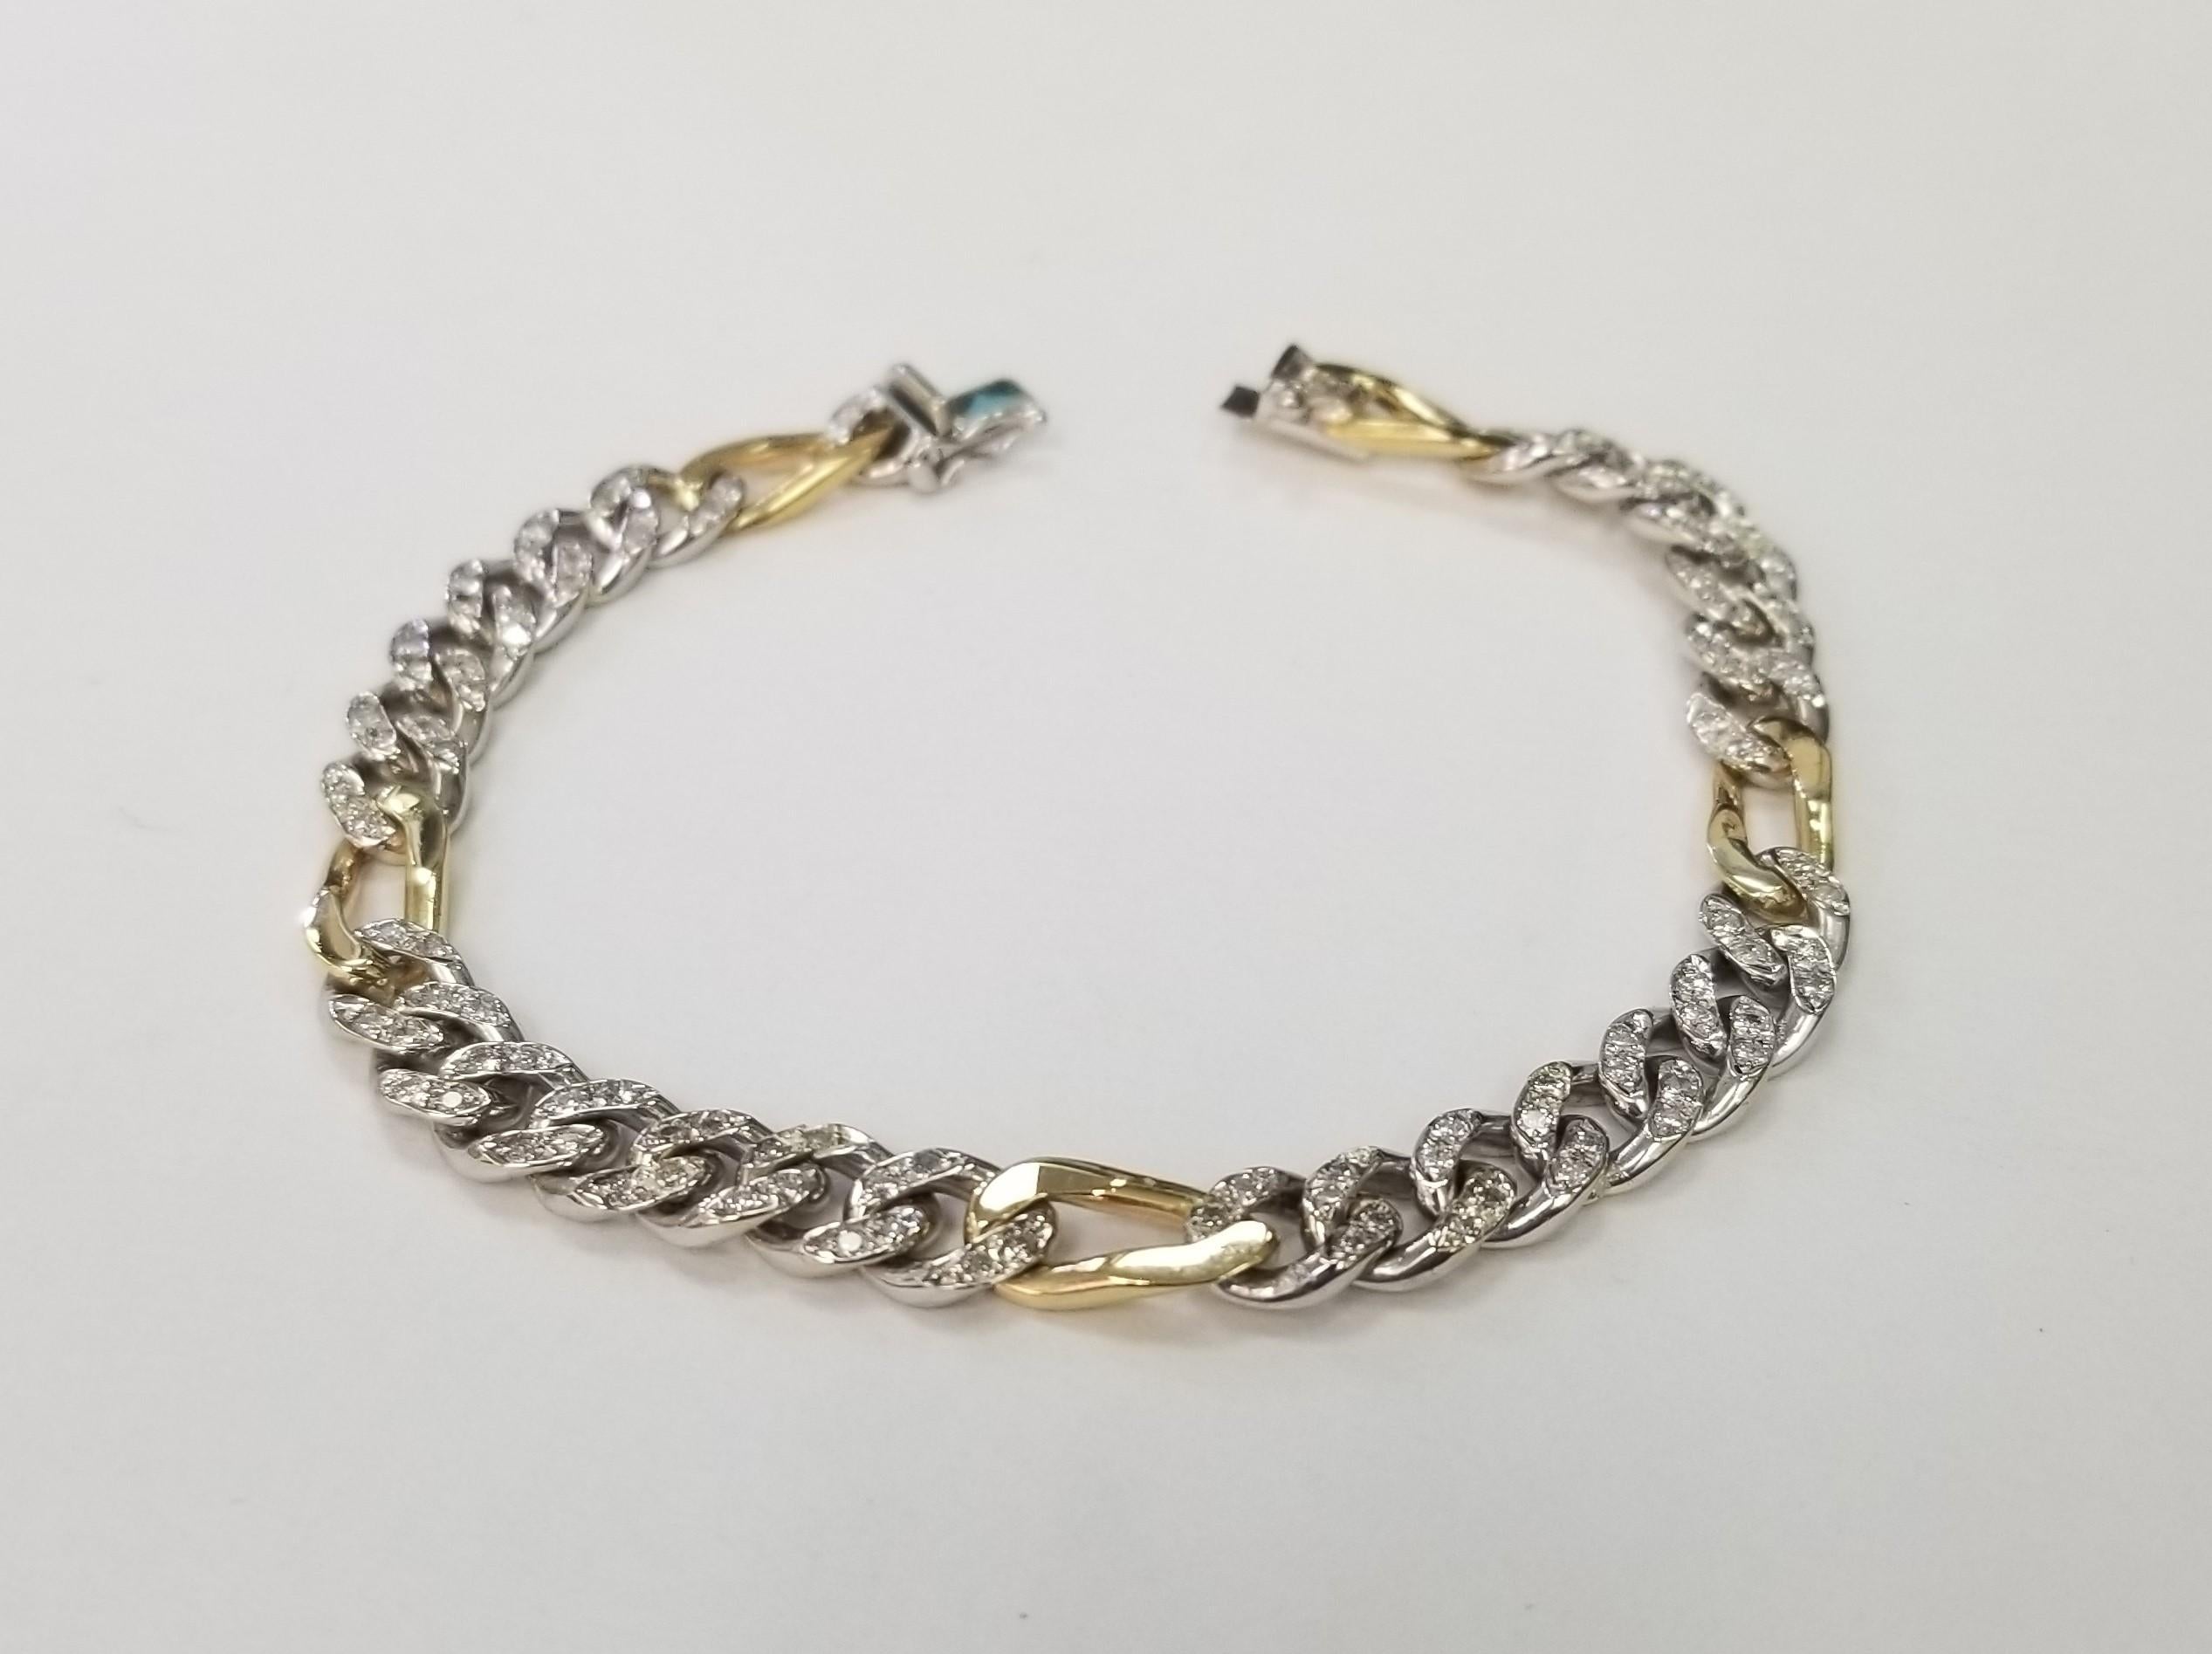 18K White & Yellow Gold Link Style Pave' Diamond Bracelet weighing 1.10cts.
Item specifics
Main Stone Color White/Colorless
Metal White Gold
Item Length 7.25 in
Total Carat Weight 1.10ct.
Jewelry Department Fine
Main Stone Diamond
Brand